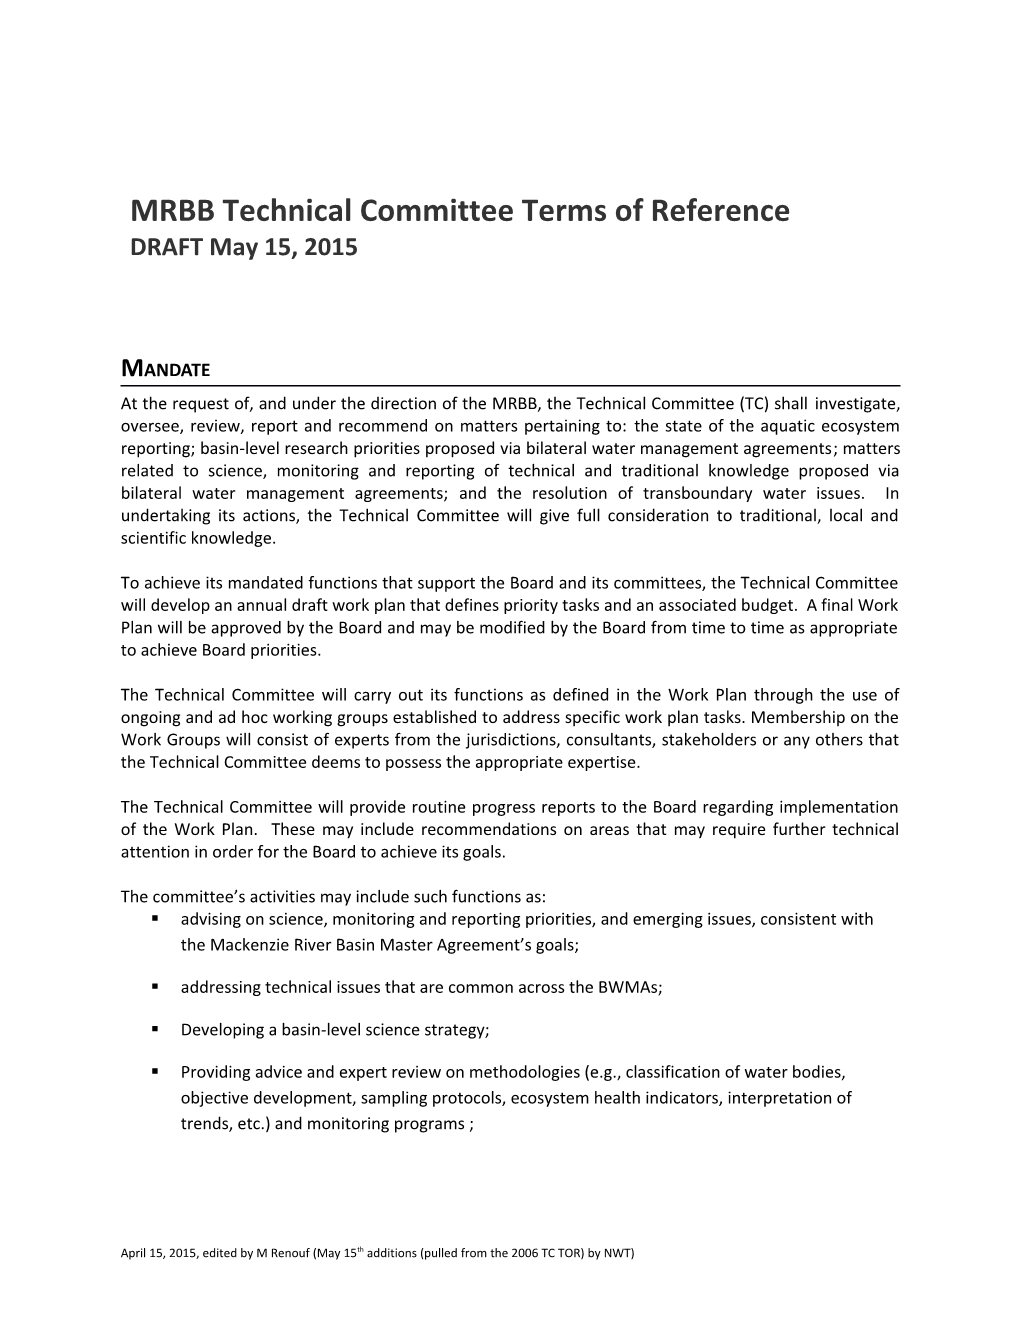 At the Request Of, and Under the Direction of the MRBB, the Technical Committee (TC) Shall